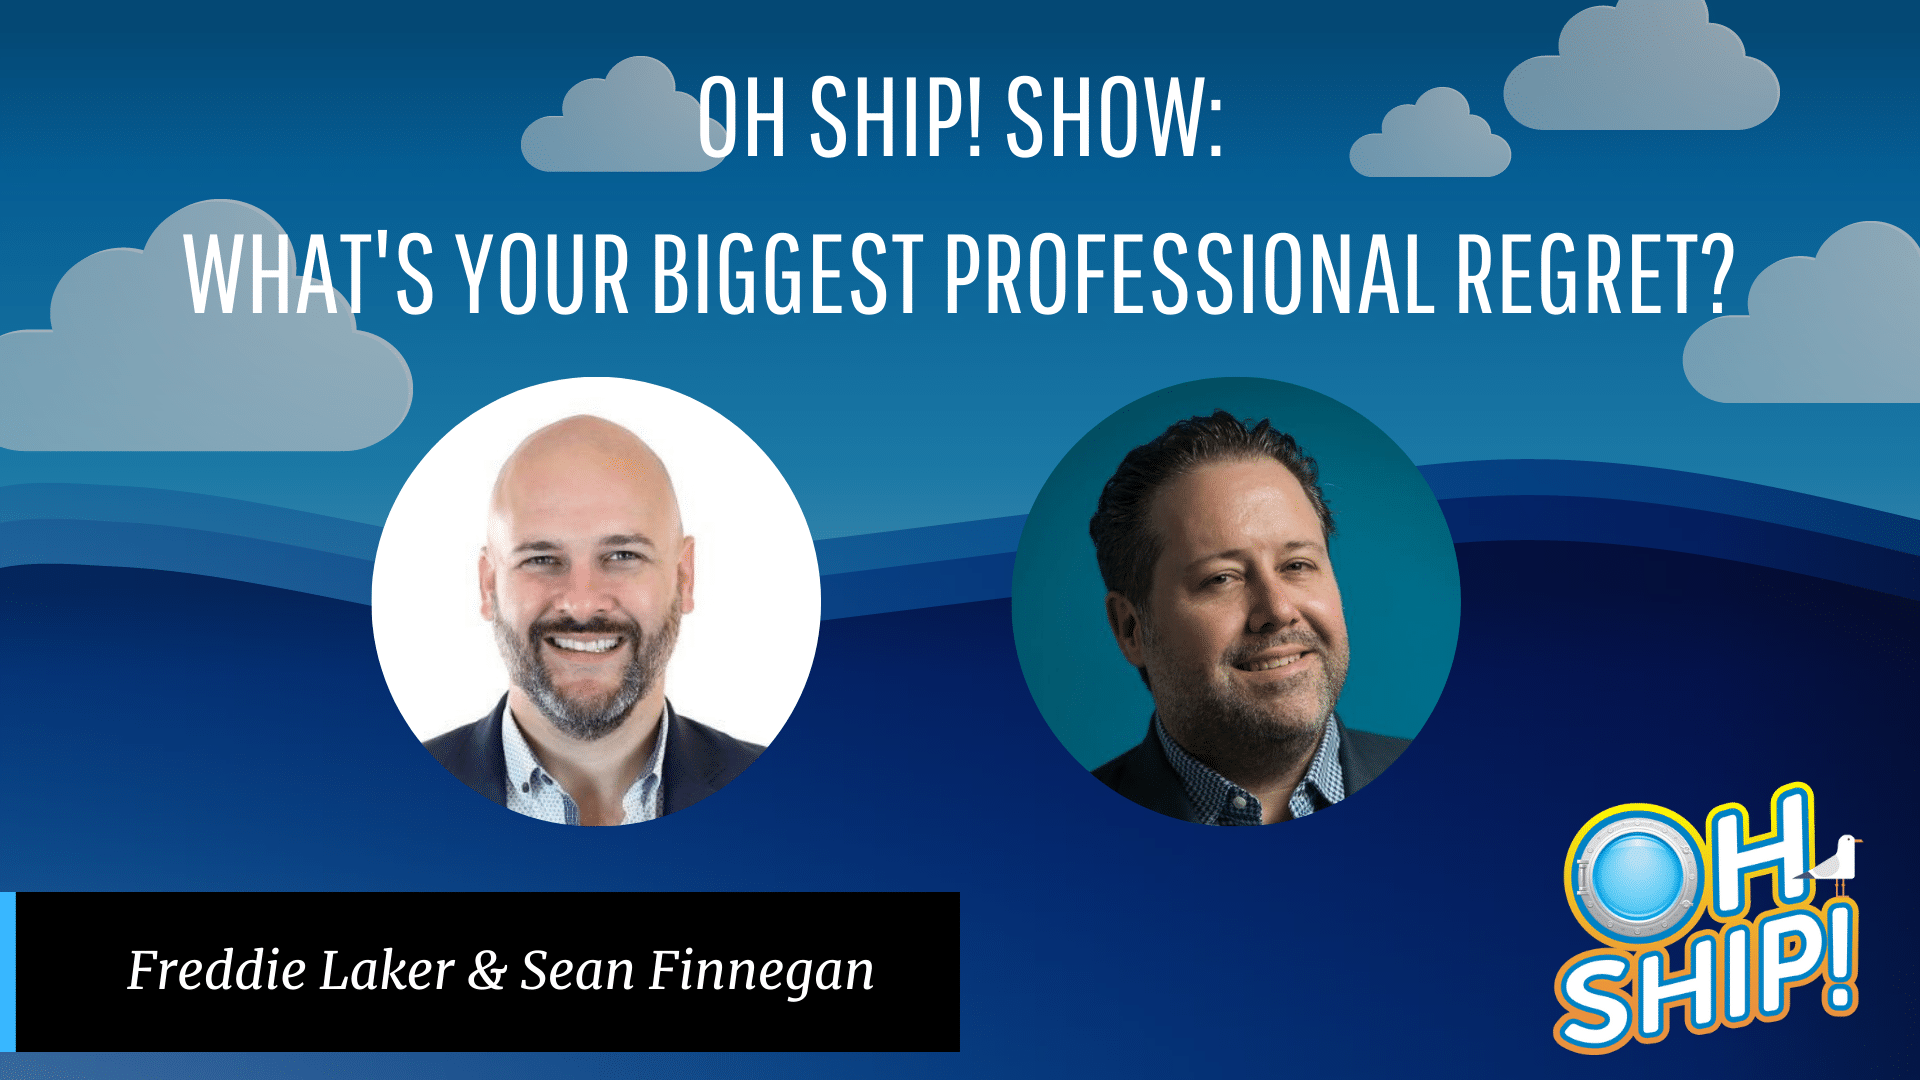 A promotional image for the "OH SHIP! SHOW" asks, "WHAT'S YOUR BIGGEST PROFESSIONAL REGRET?" and showcases photos of Freddie Laker & Sean Finnegan. The background features clouds and a blue sea with the show's logo in the bottom corner. Don't miss this candid discussion on professional regrets!